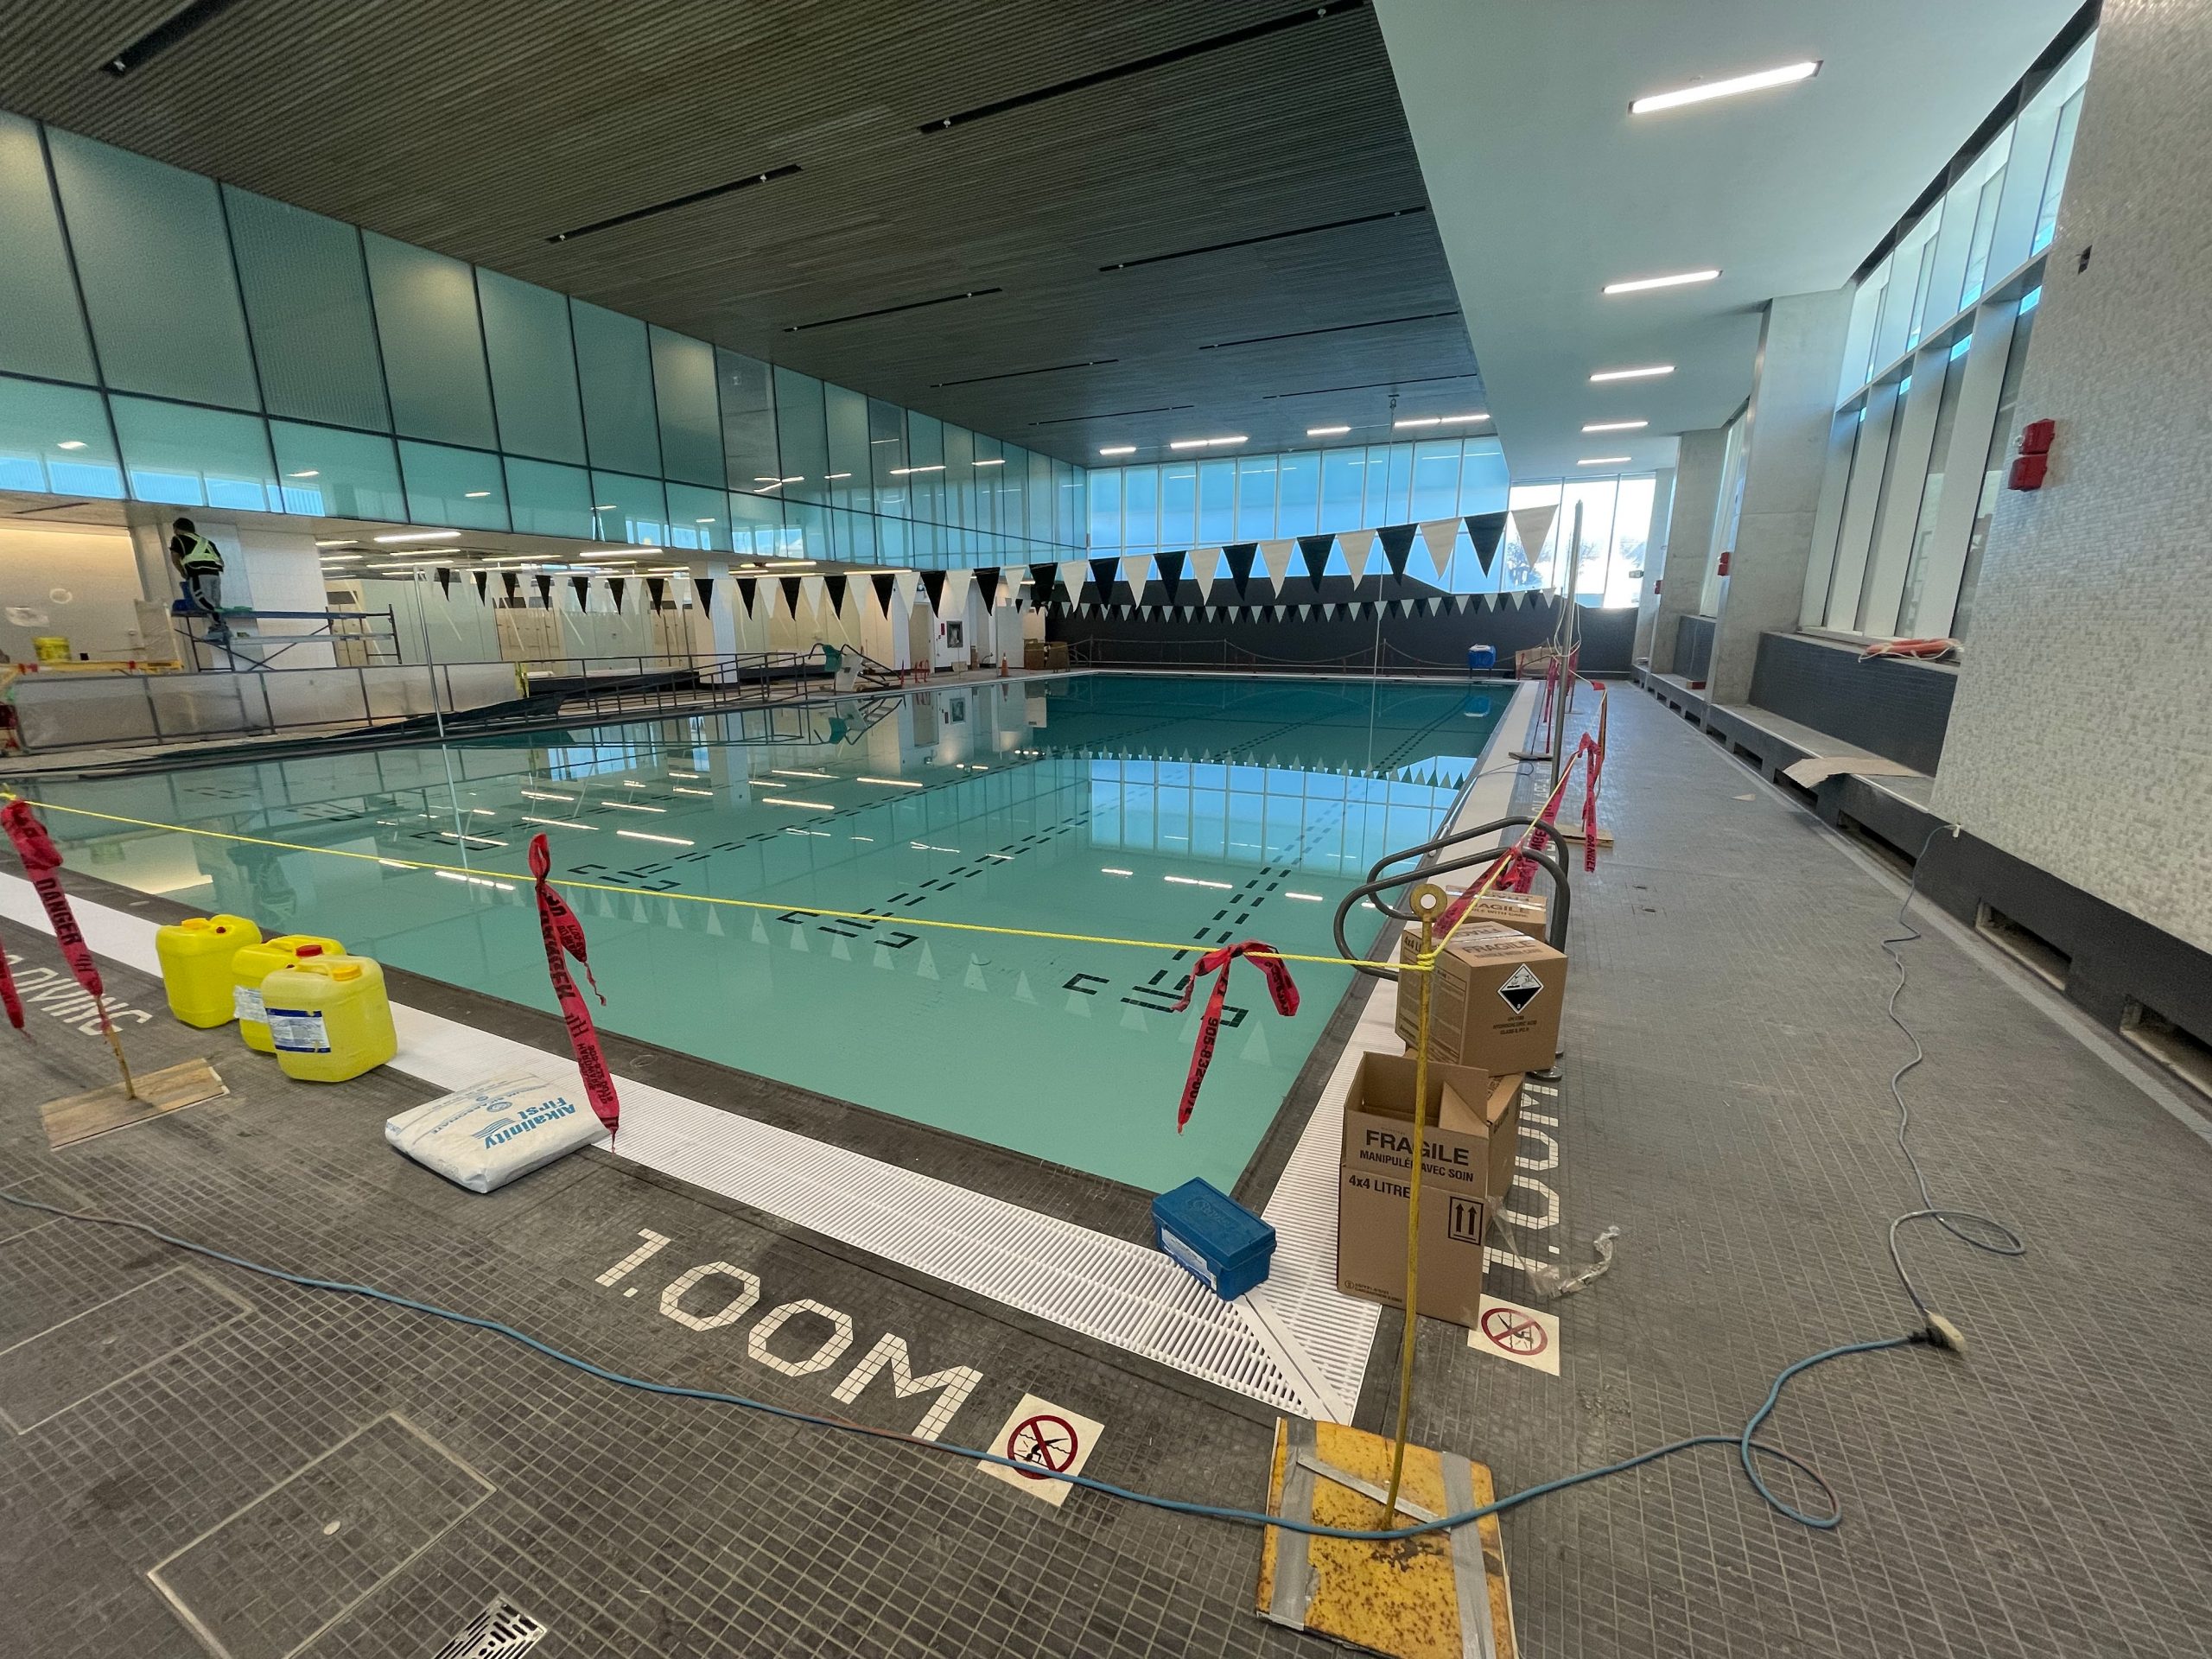 A photograph showing the construction progress of the indoor swimming pool in the new Ethennonnhawahstihnen’ Community Recreation Centre. The photo shows a substantially completed swimming pool, with a pool deck and frosted glass panel design features. 